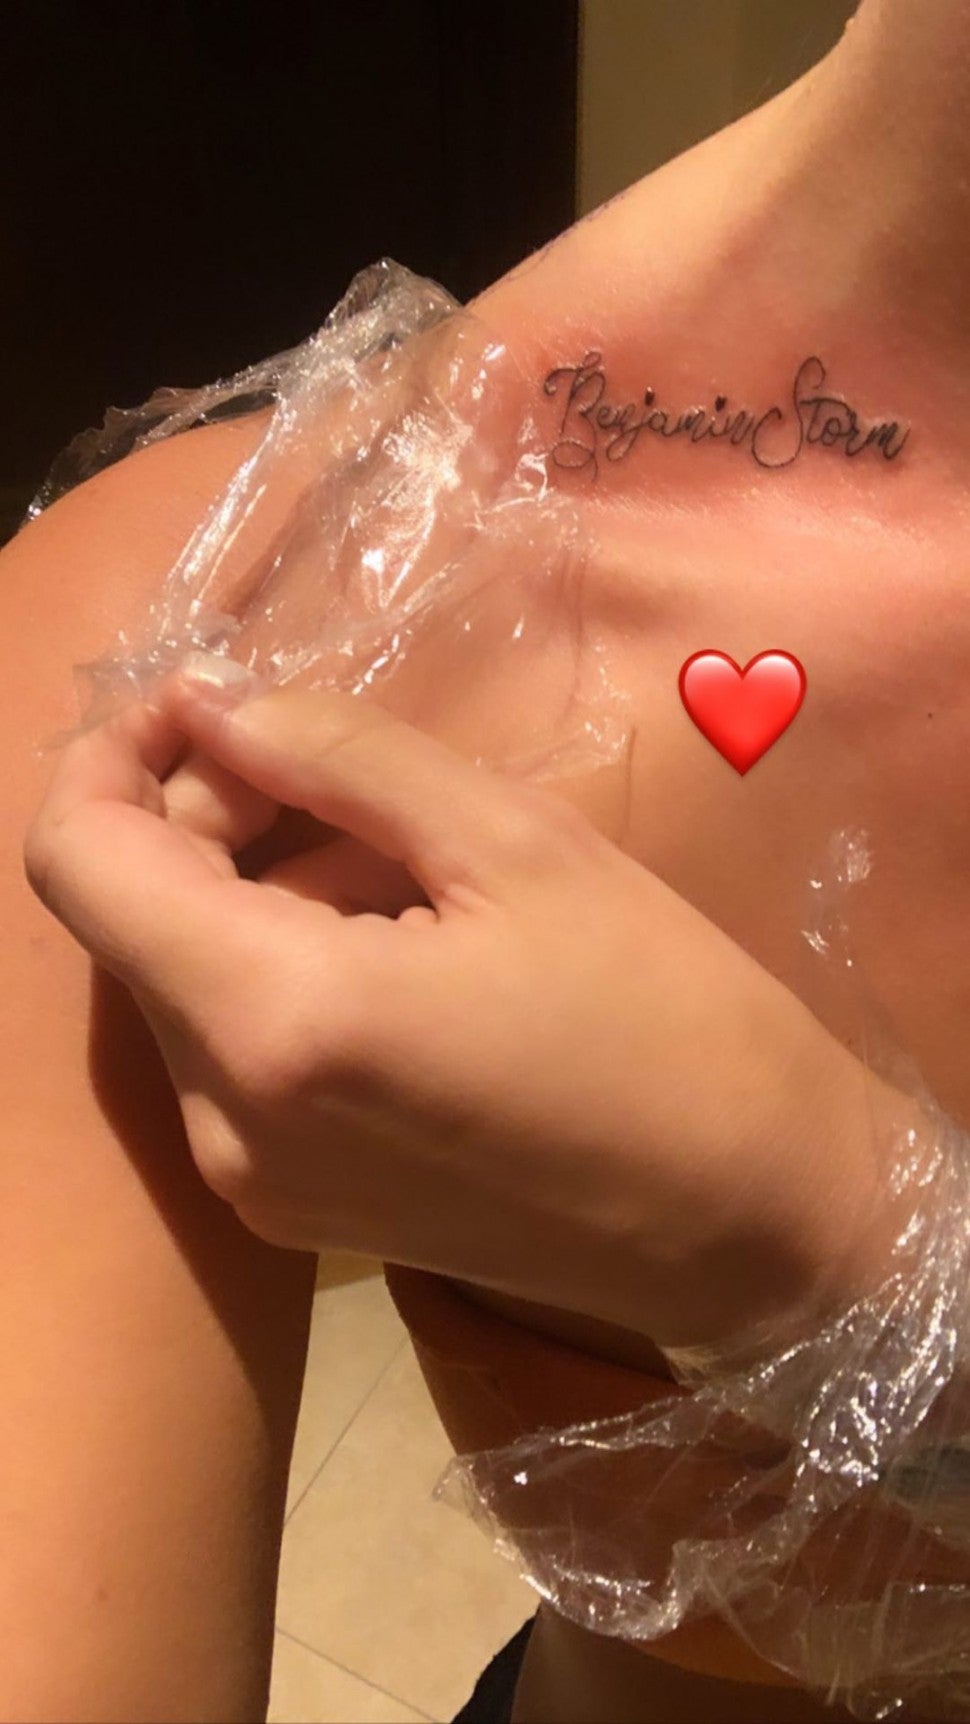 Riley Keough shows off tattoo for her late brother